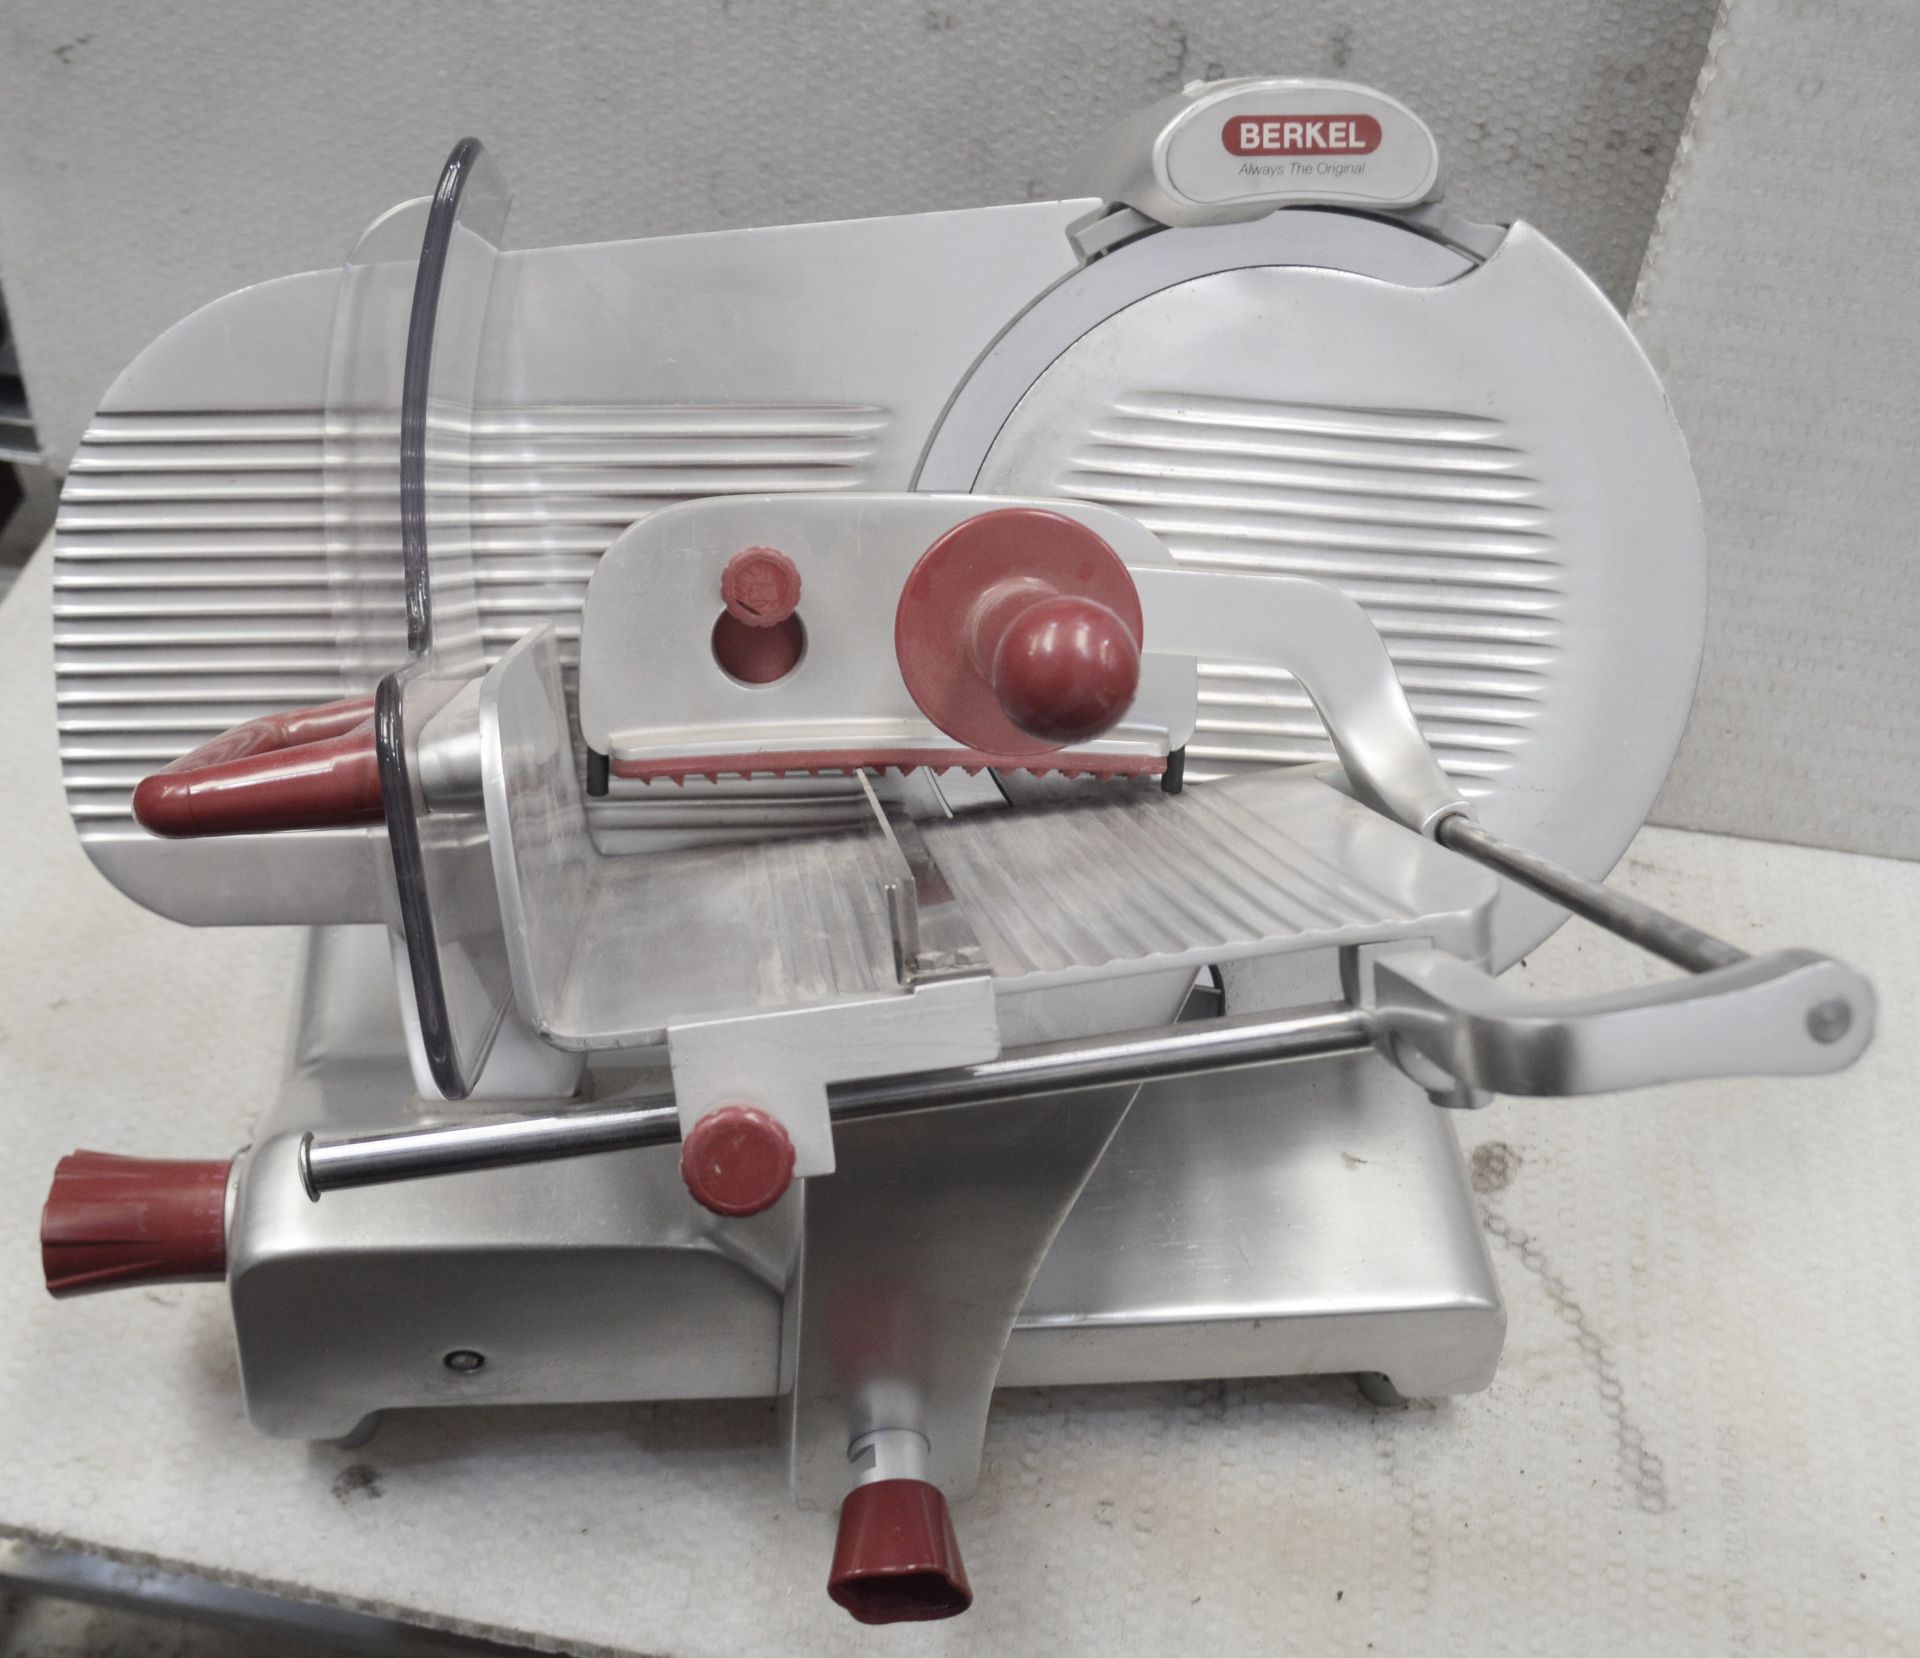 1 x Berkel 12" Commercial Cooked Meat / Bacon Slicer - 220-240v - Model BSPGL04011A0F - Image 3 of 4